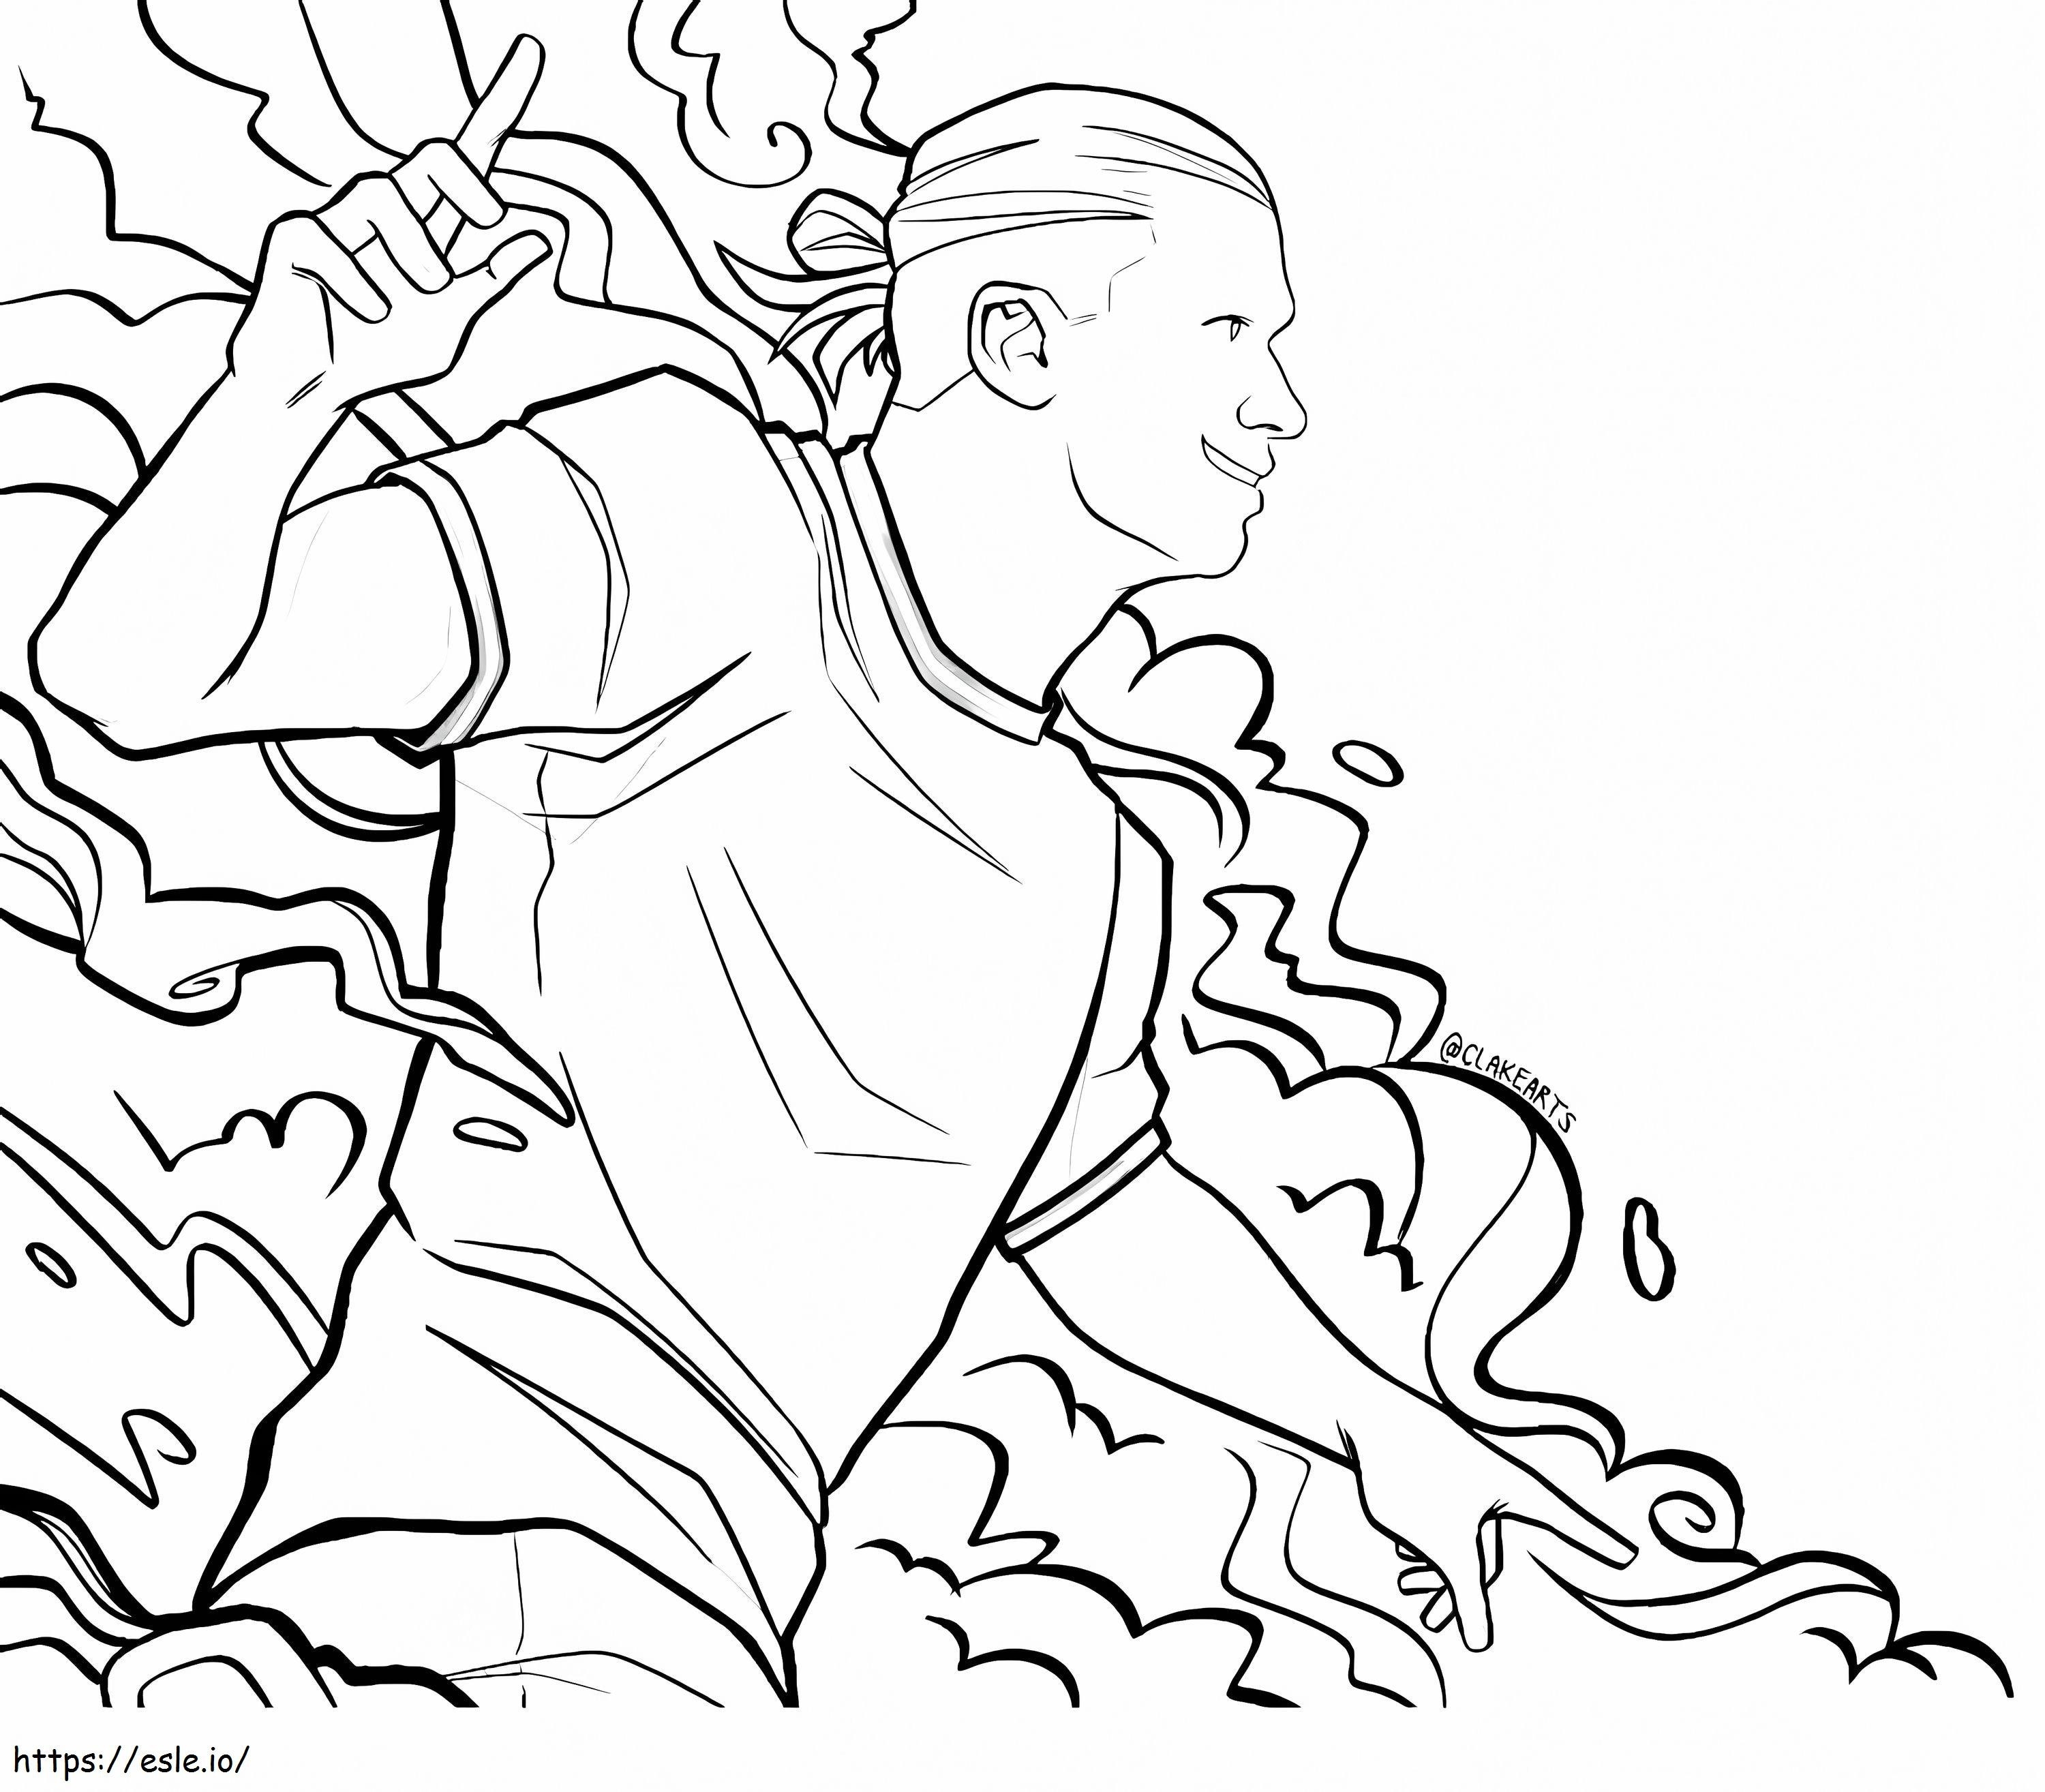 Erling Haaland 1 coloring page